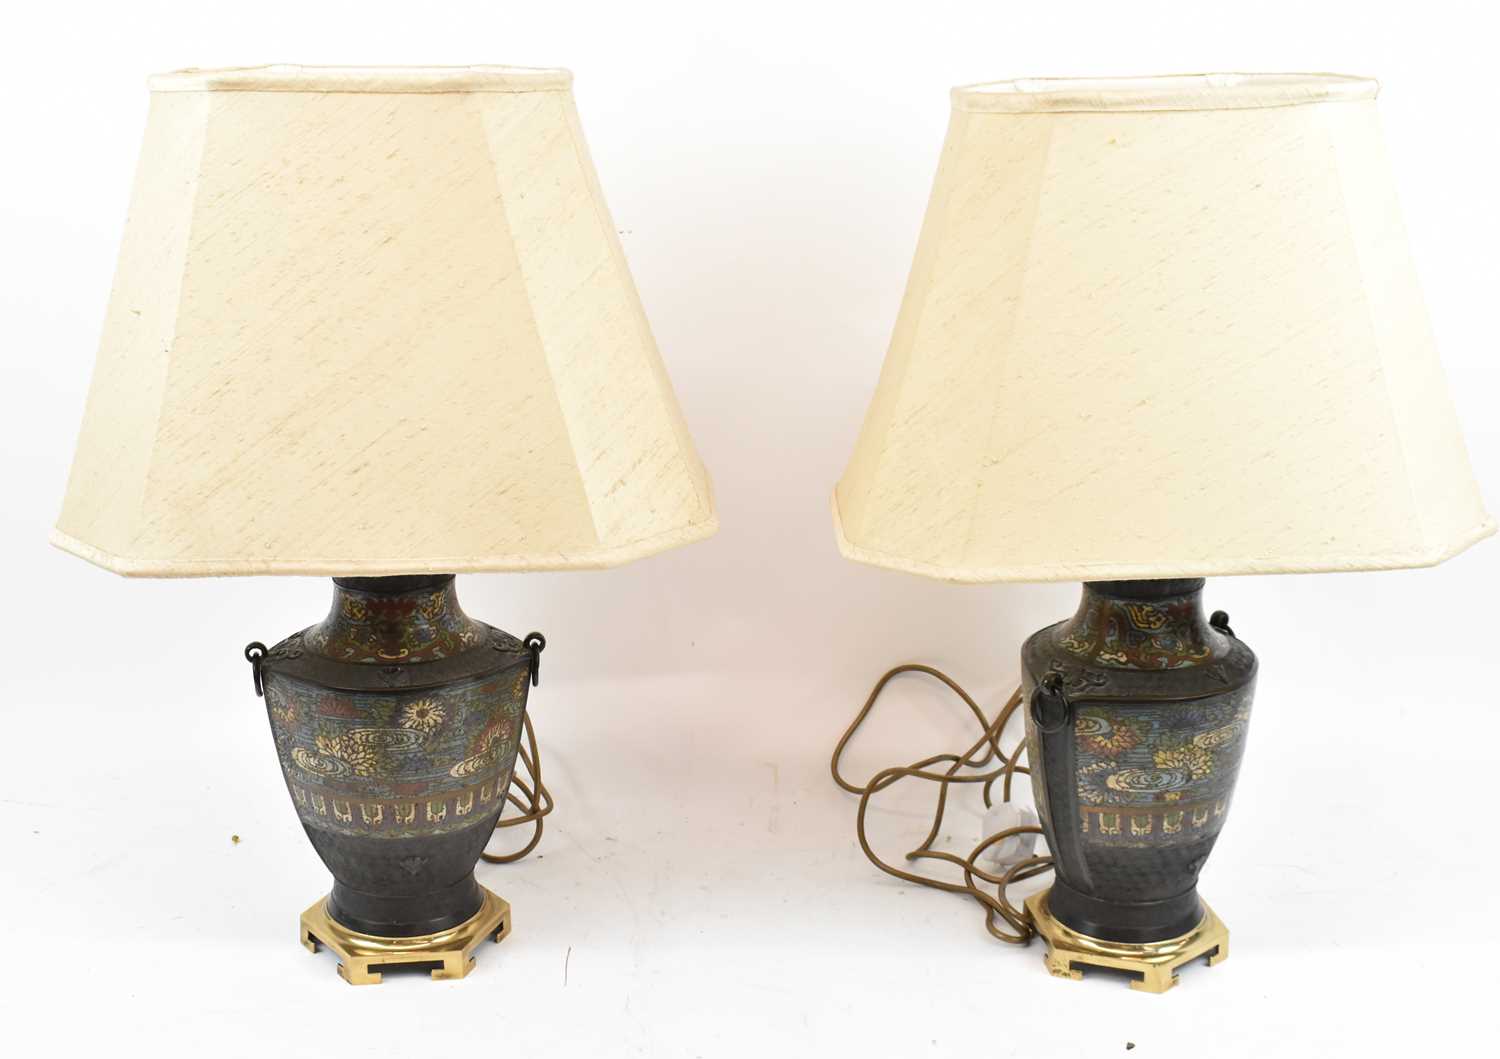 A pair of 19th century Japanese bronze and enamel temple jars converted to table lamps, height 33cm,